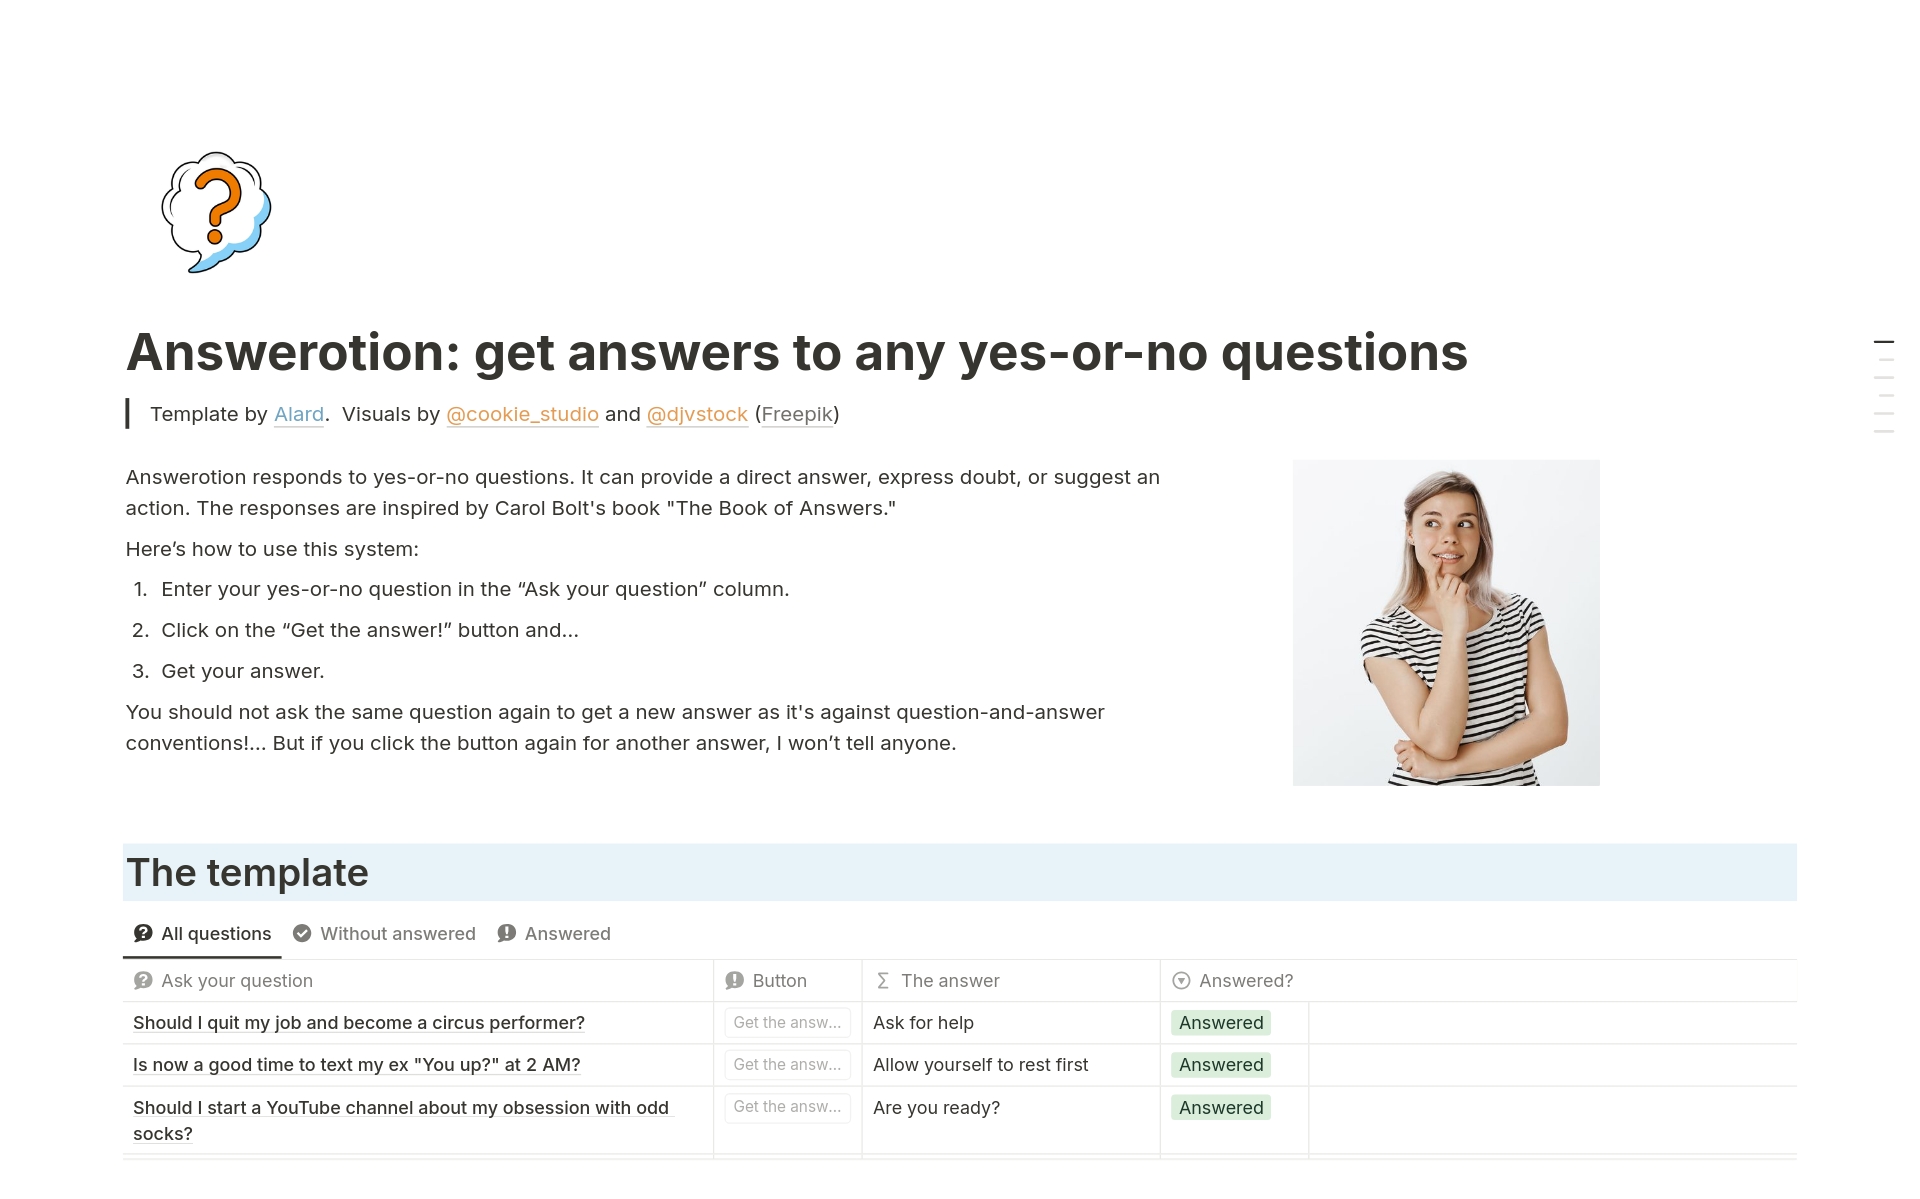 Mallin esikatselu nimelle Answerotion: get answers to yes-or-no questions